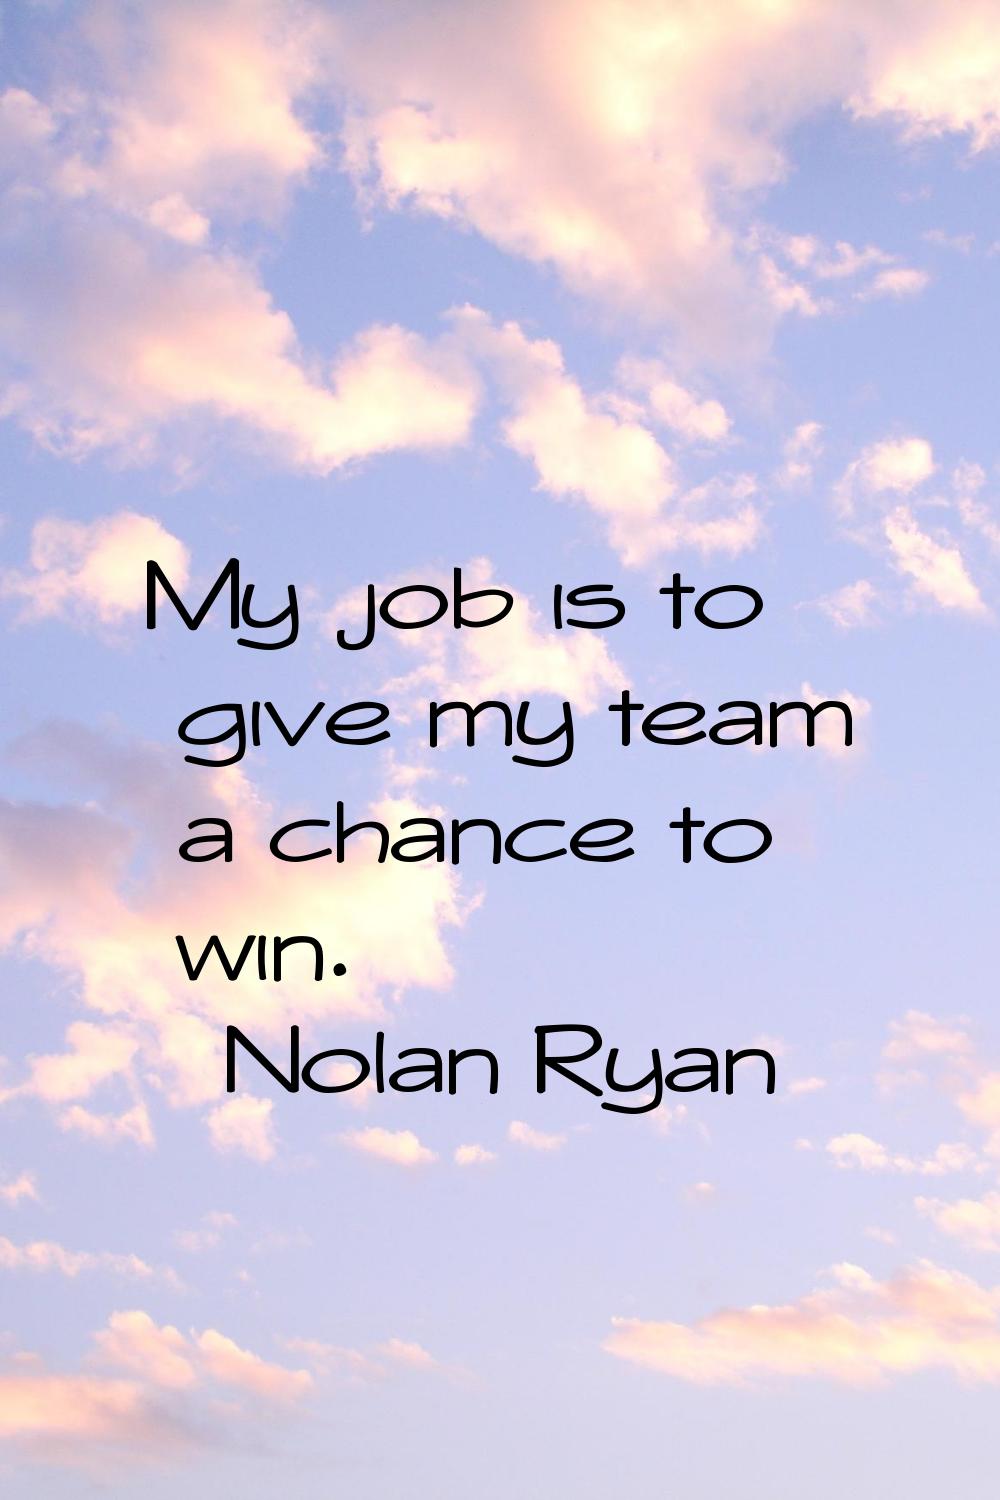 My job is to give my team a chance to win.